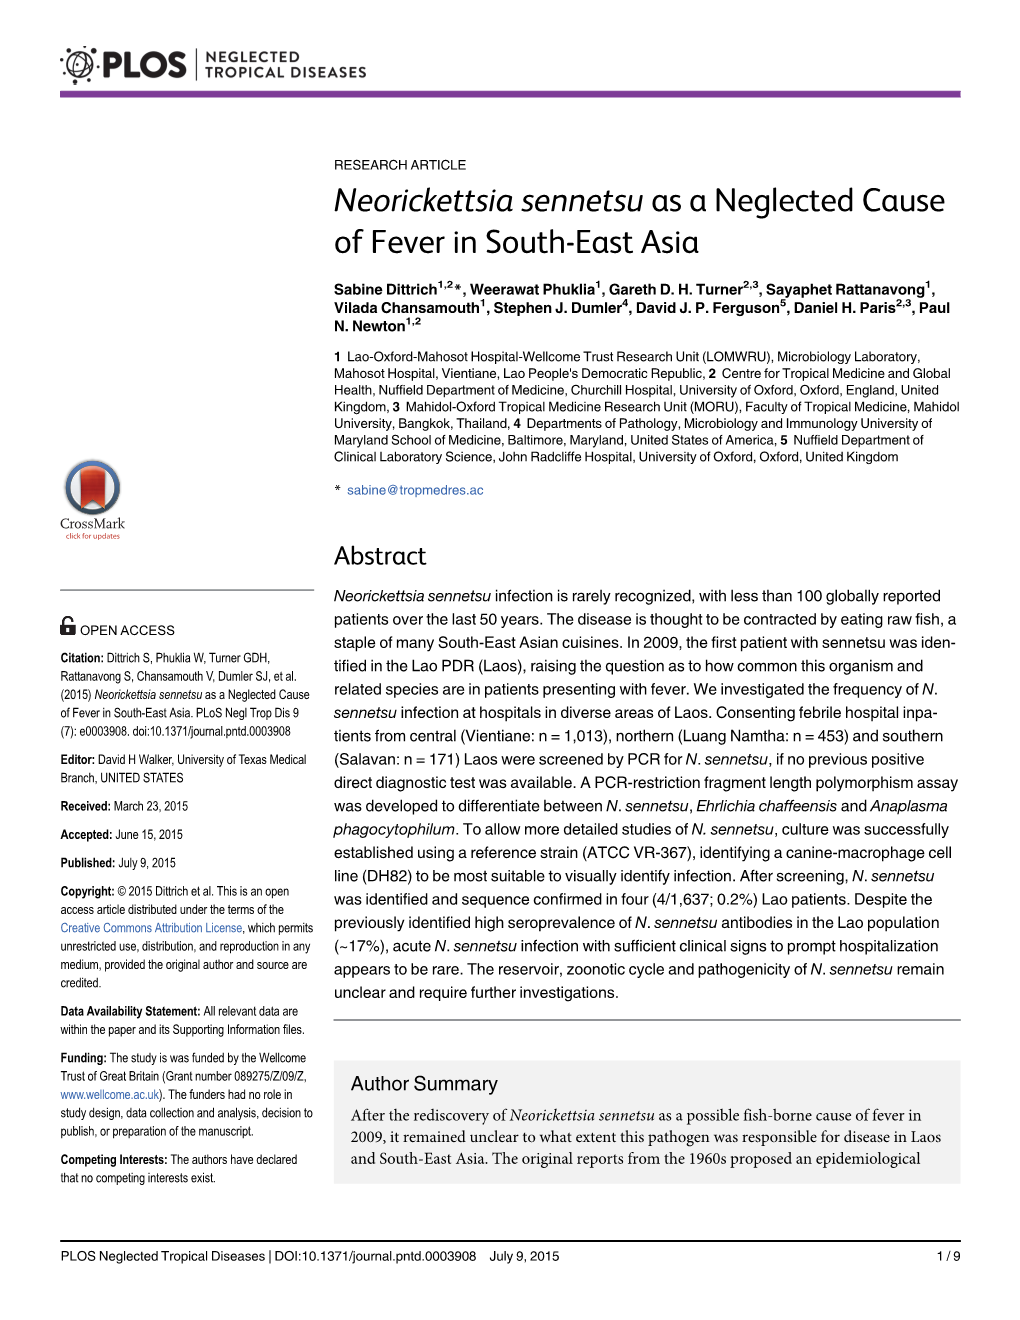 Neorickettsia Sennetsu As a Neglected Cause of Fever in South-East Asia